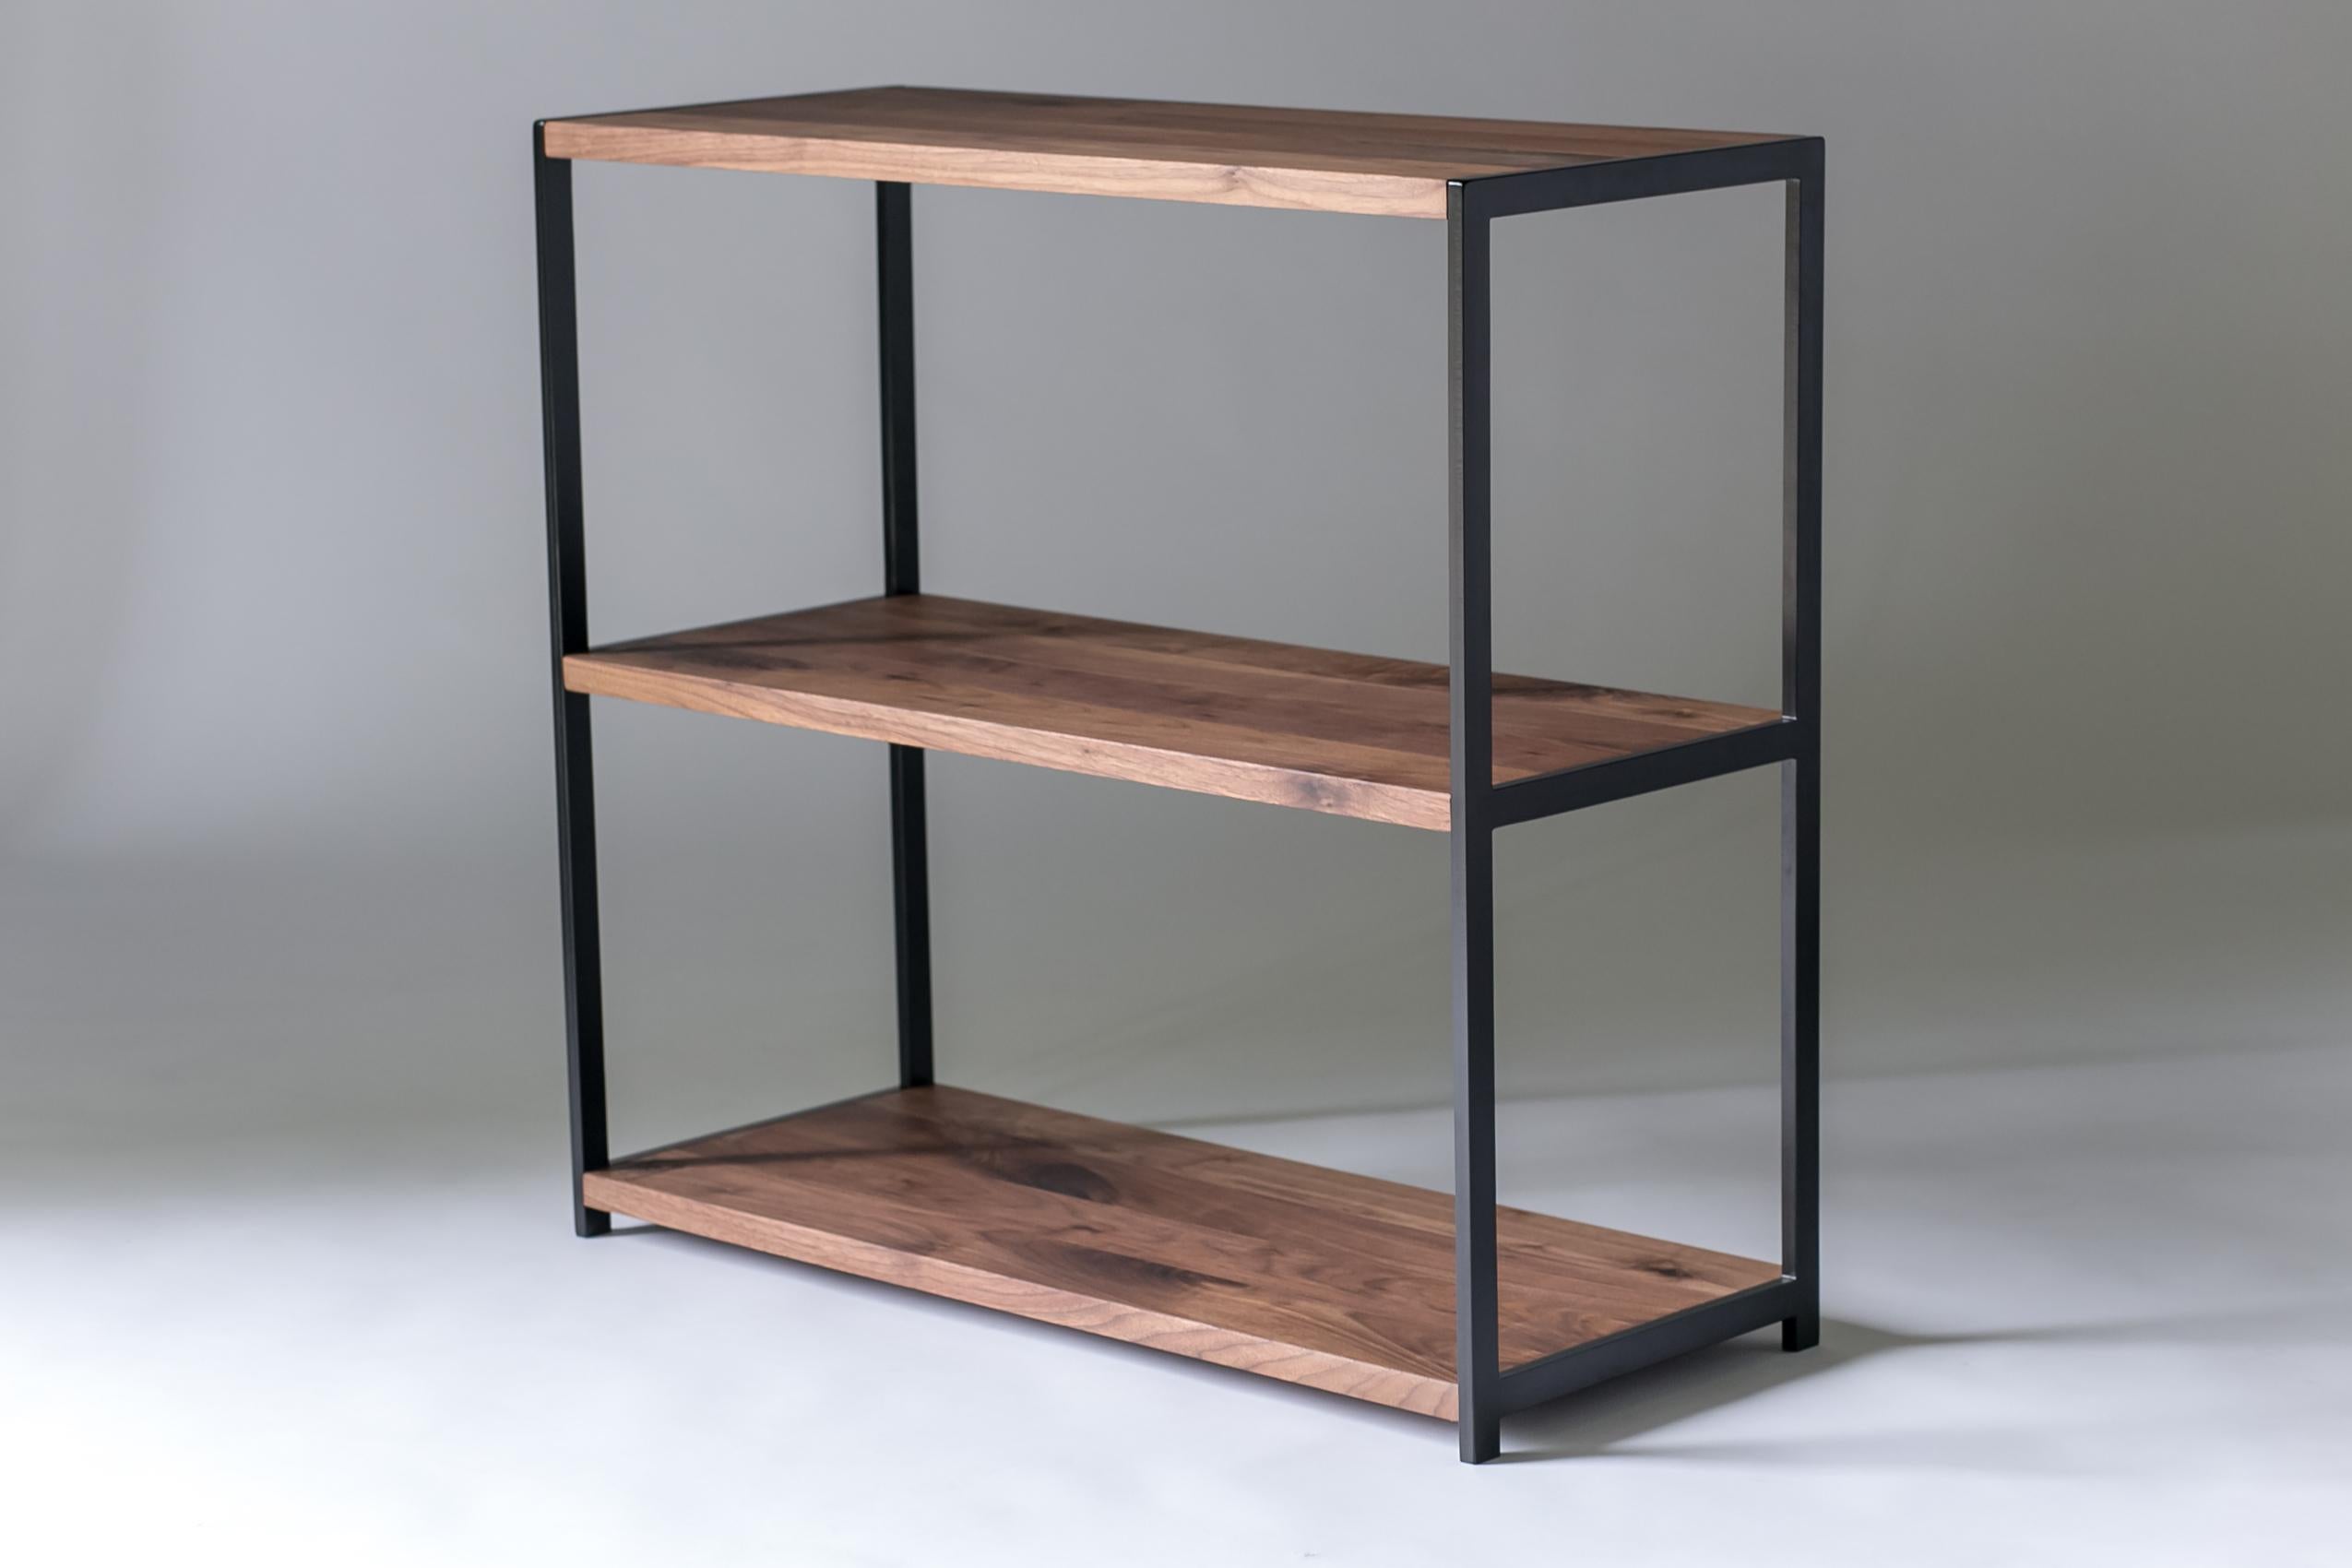 The Index, Modern Walnut and Powder Coated Steel Bookshelf.

The Walnut bookshelf provides the perfect place to display everything from book collections, prized photos, to a turntable and speakers. Three solid walnut shelves are supported by a